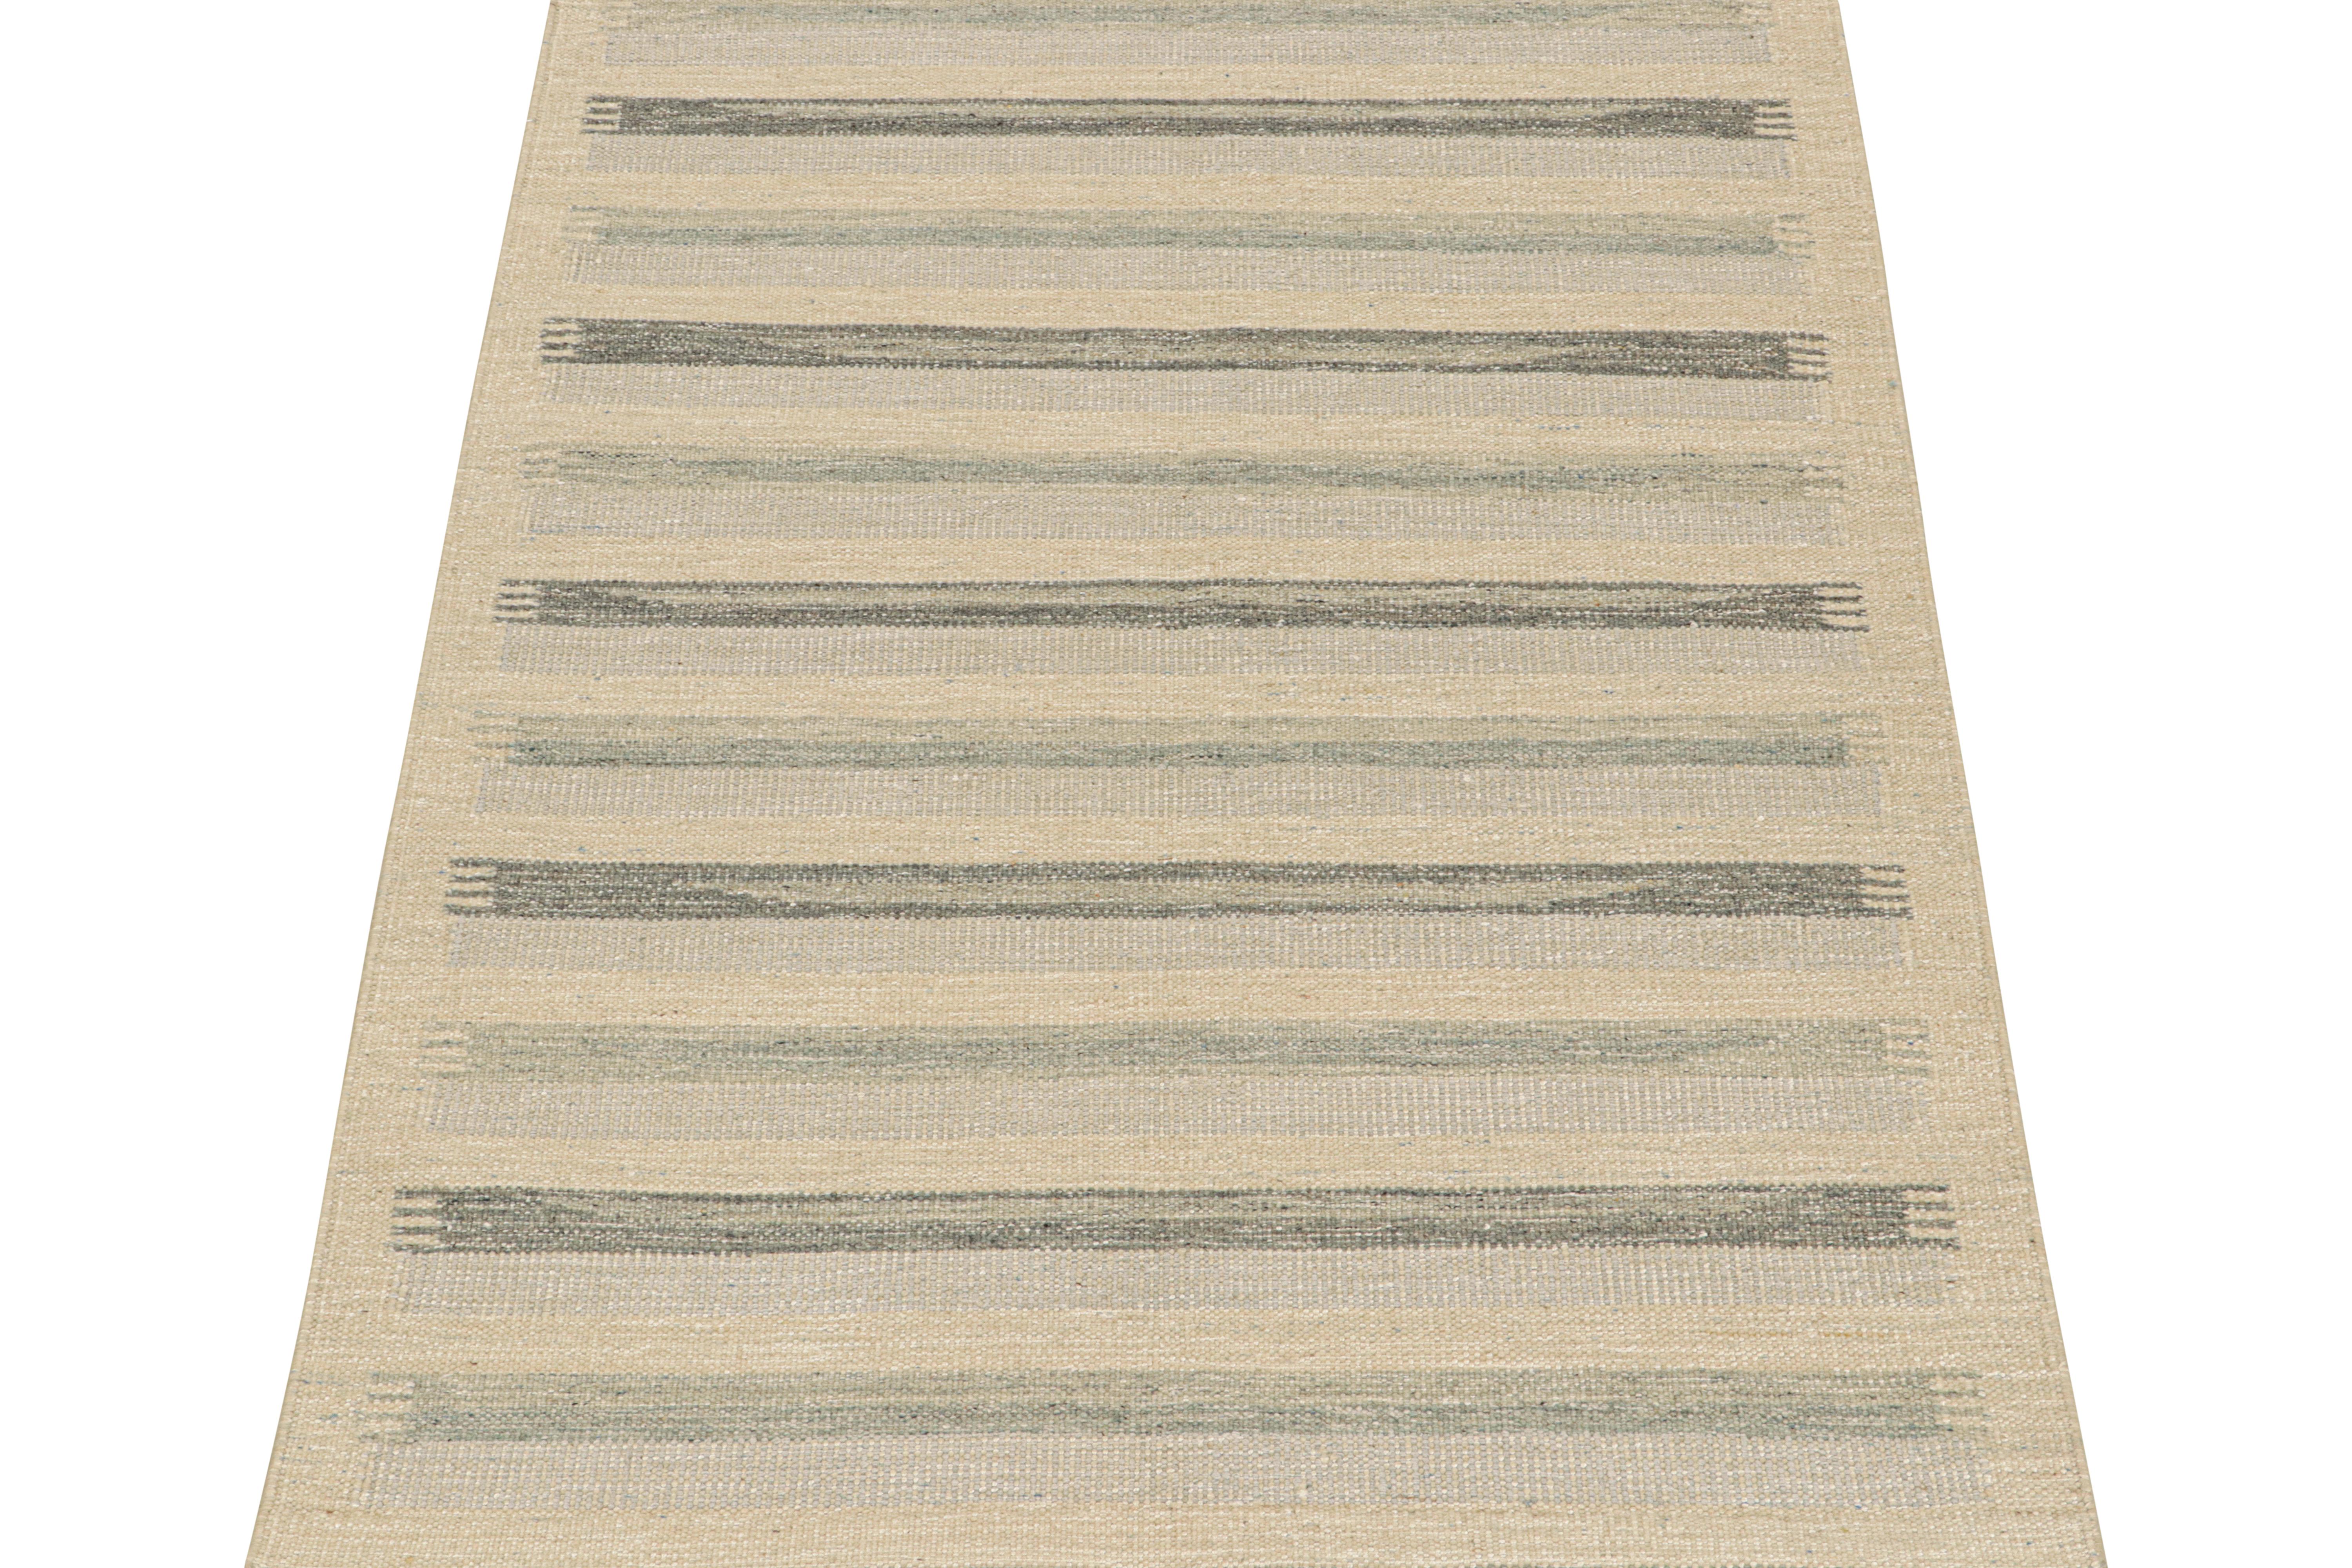 This 5 x 7 flat weave rug is a bold new addition to the Scandinavian Collection by Rug & Kilim. Handwoven in wool and natural yarns, its design reflects a contemporary take on midcentury Rollakans and Swedish 
Deco style.

On the design:

This